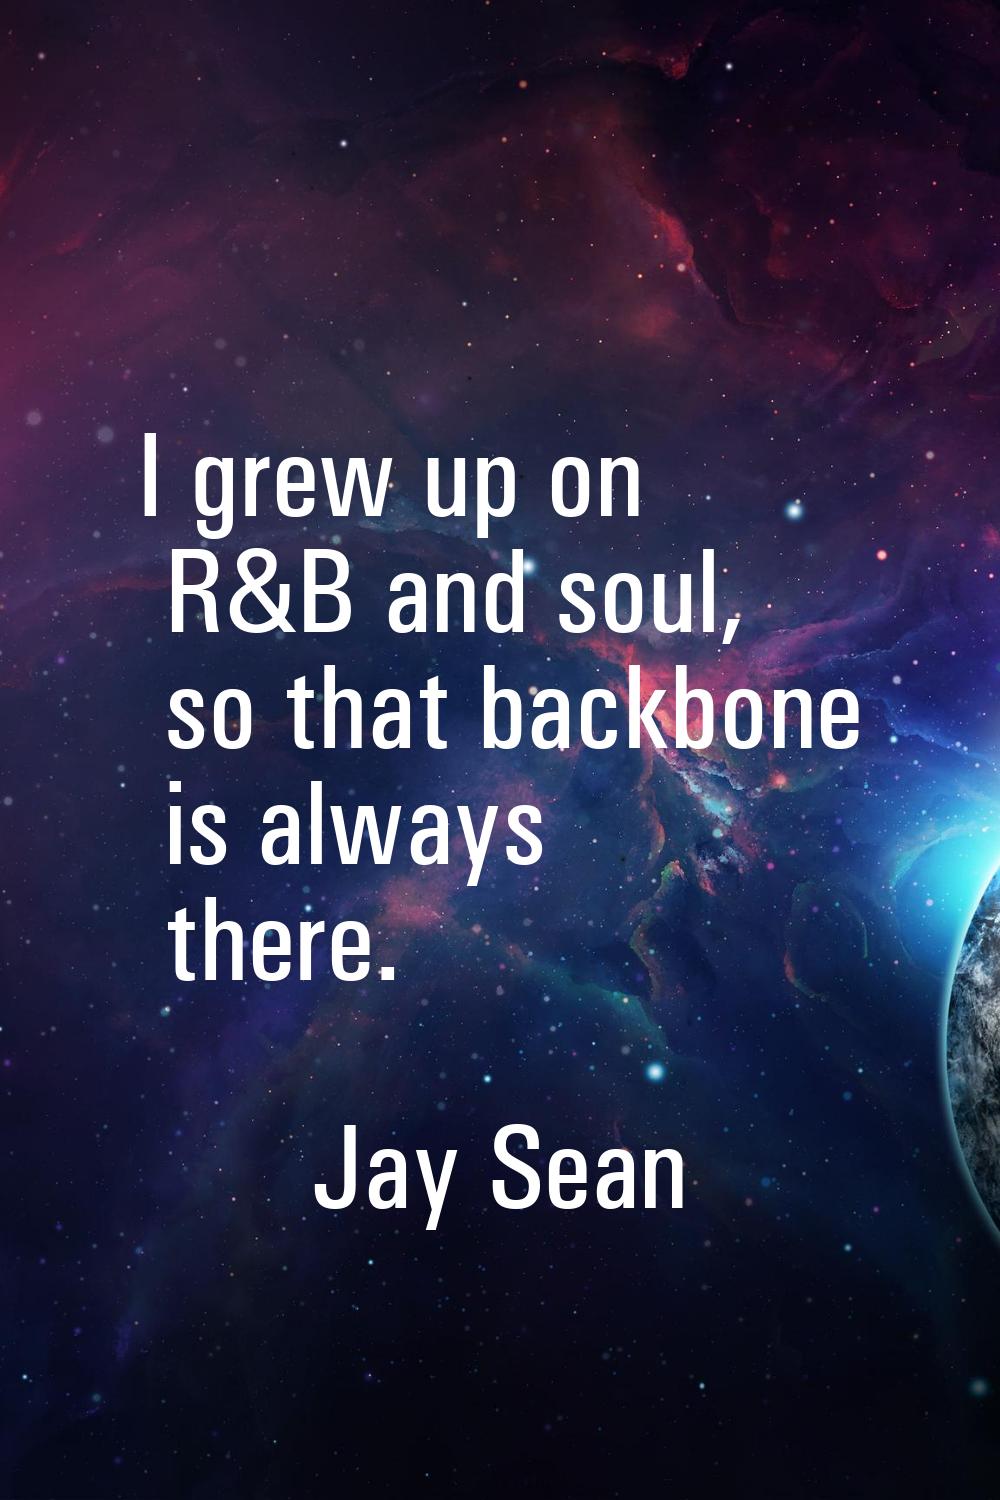 I grew up on R&B and soul, so that backbone is always there.